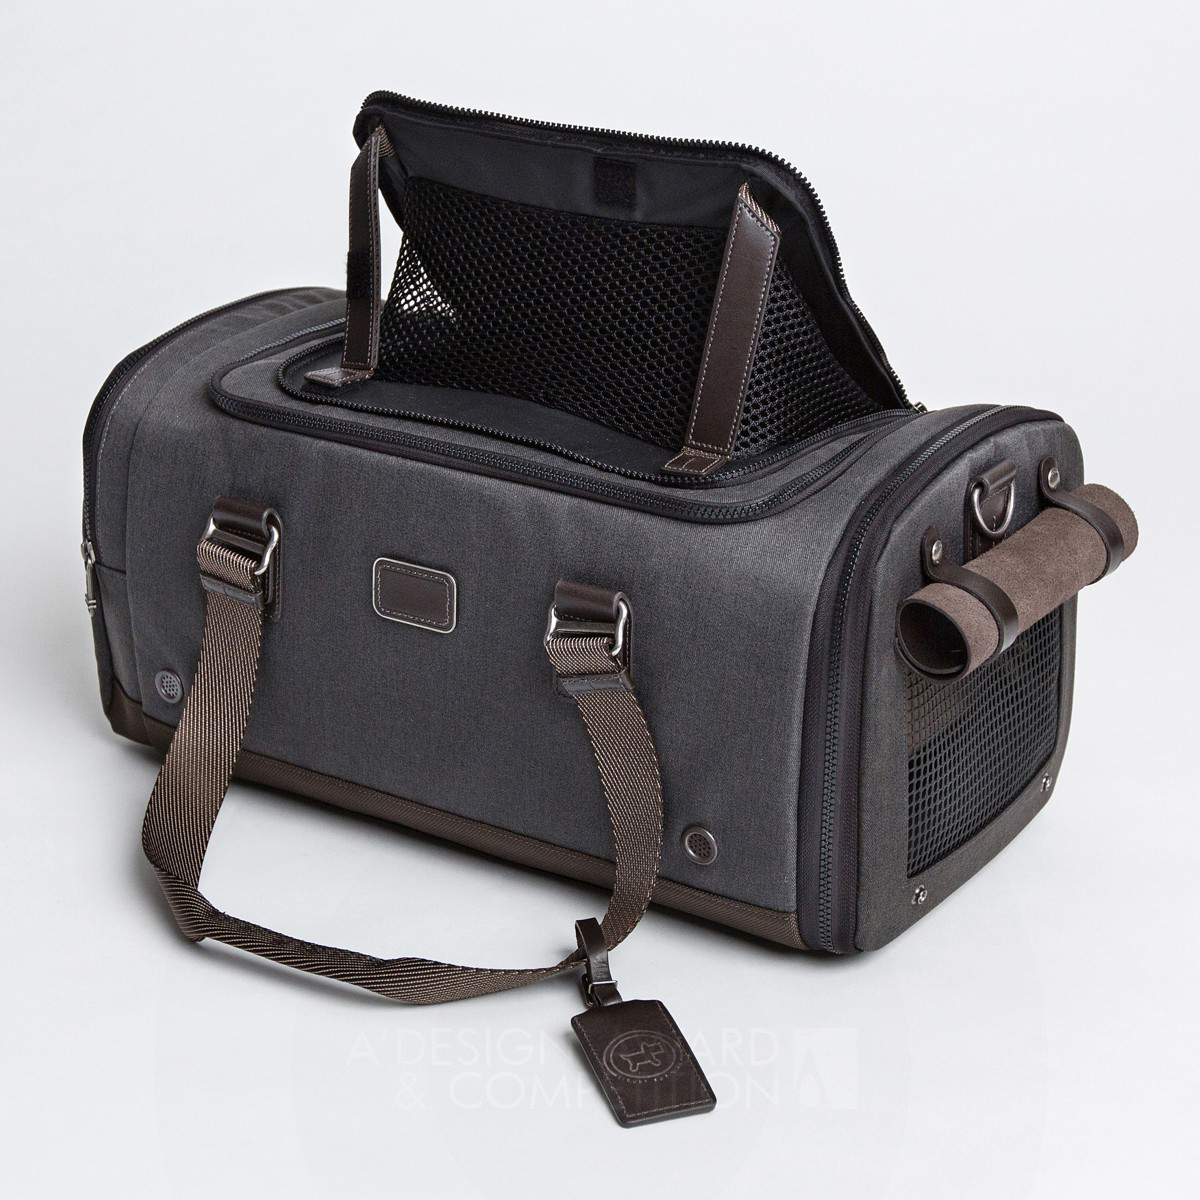 Cloud7 for TUMI Dog Flight Cabin Carrier by Petra Jungebluth